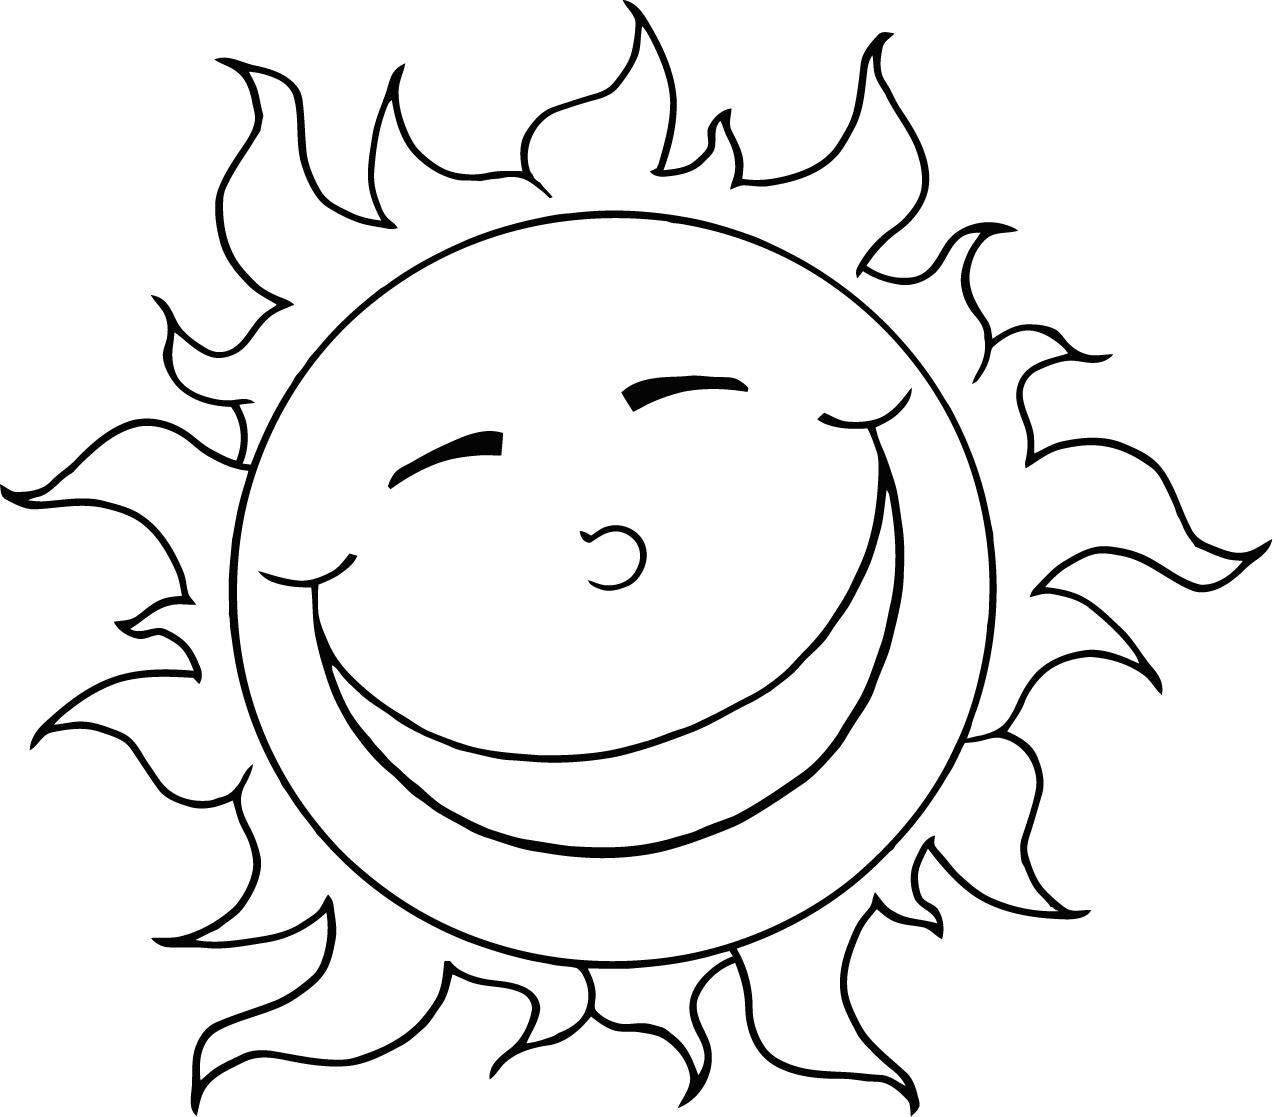 free-printable-sun-coloring-pages-for-kids